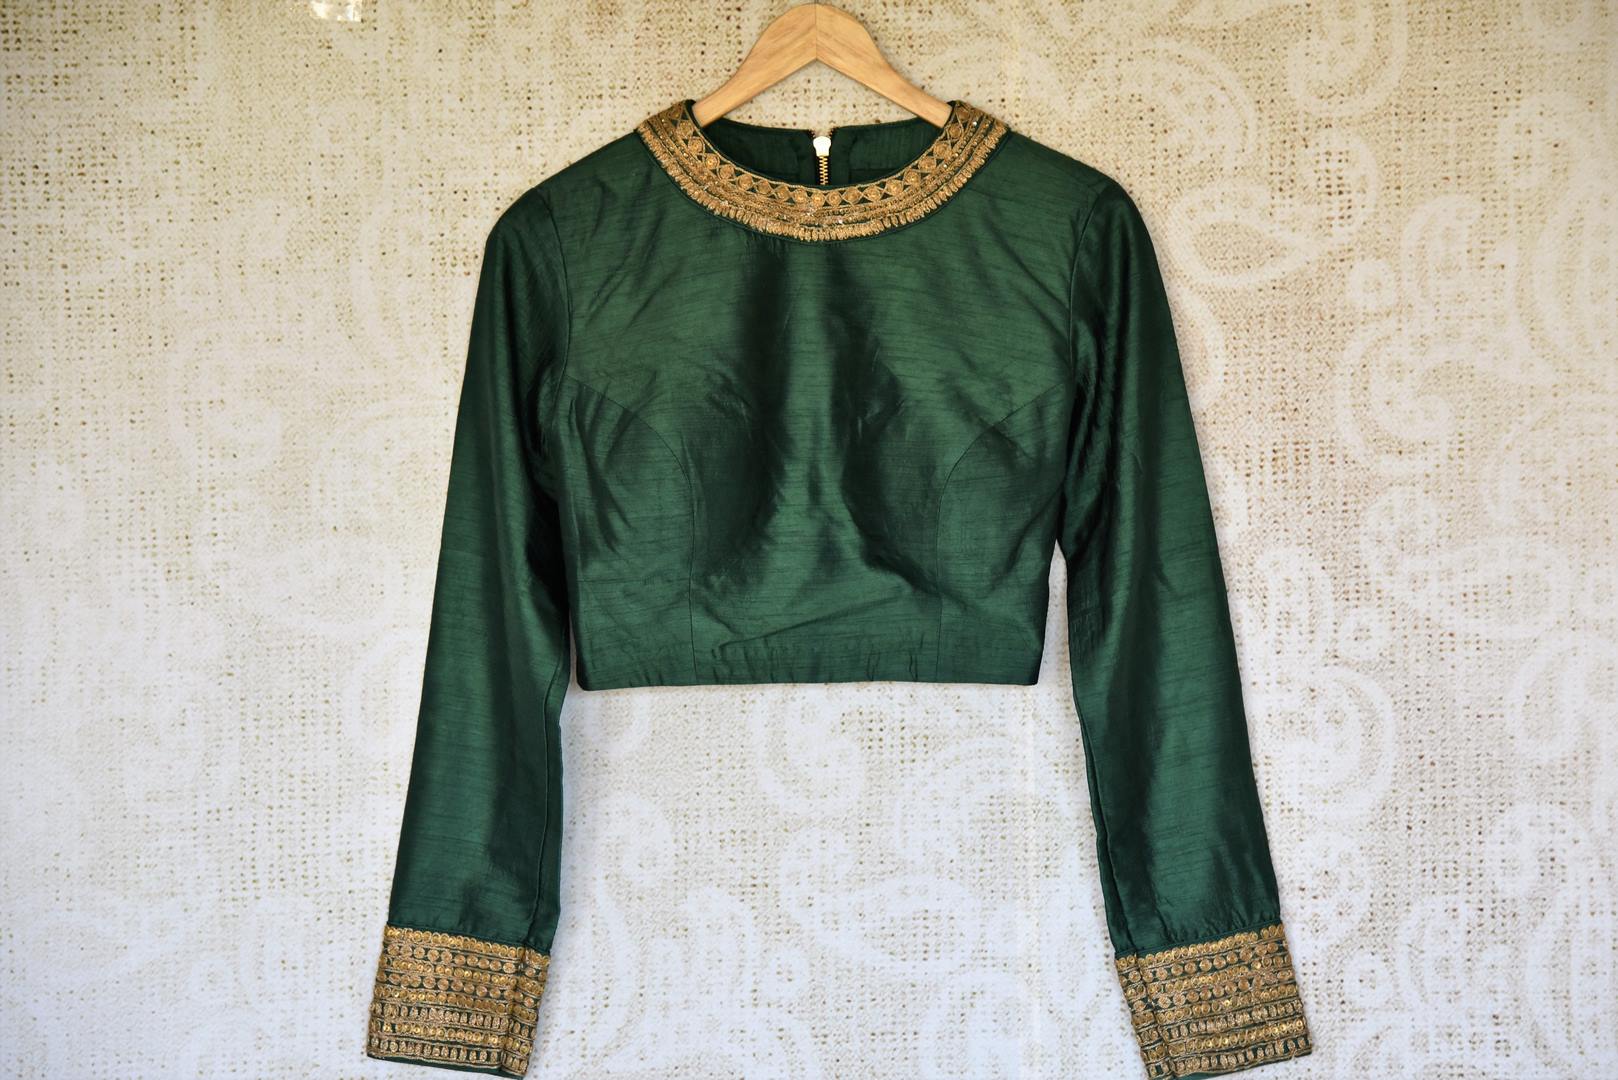 Buy bottle green embroidered silk designer sari blouse with full sleeves online in USA. Complete your saree look with exquisite designer sari blouses from Pure Elegance Indian clothing store in USA. -front